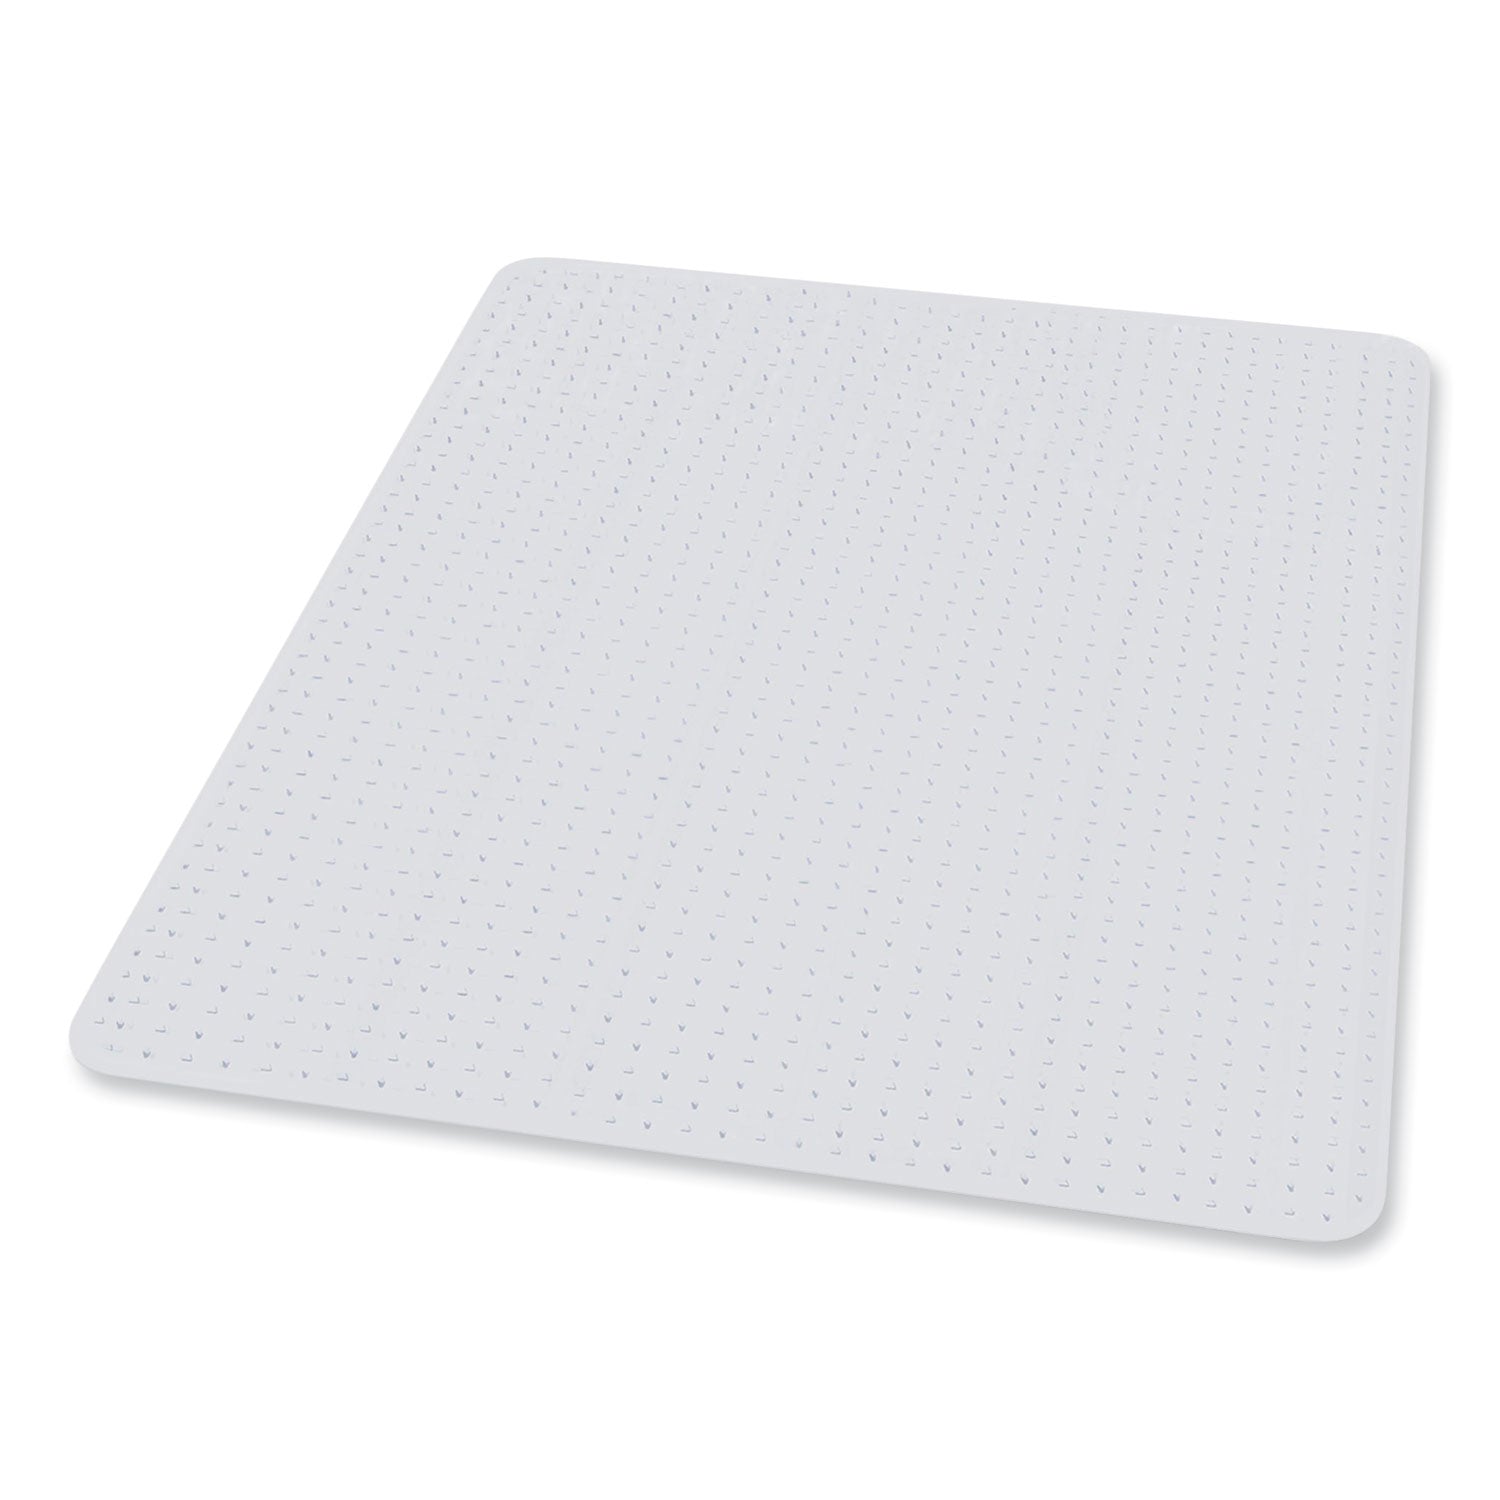 everlife-chair-mat-for-extra-high-pile-carpet-60-x-72-clear-ships-in-4-6-business-days_esr124781 - 1